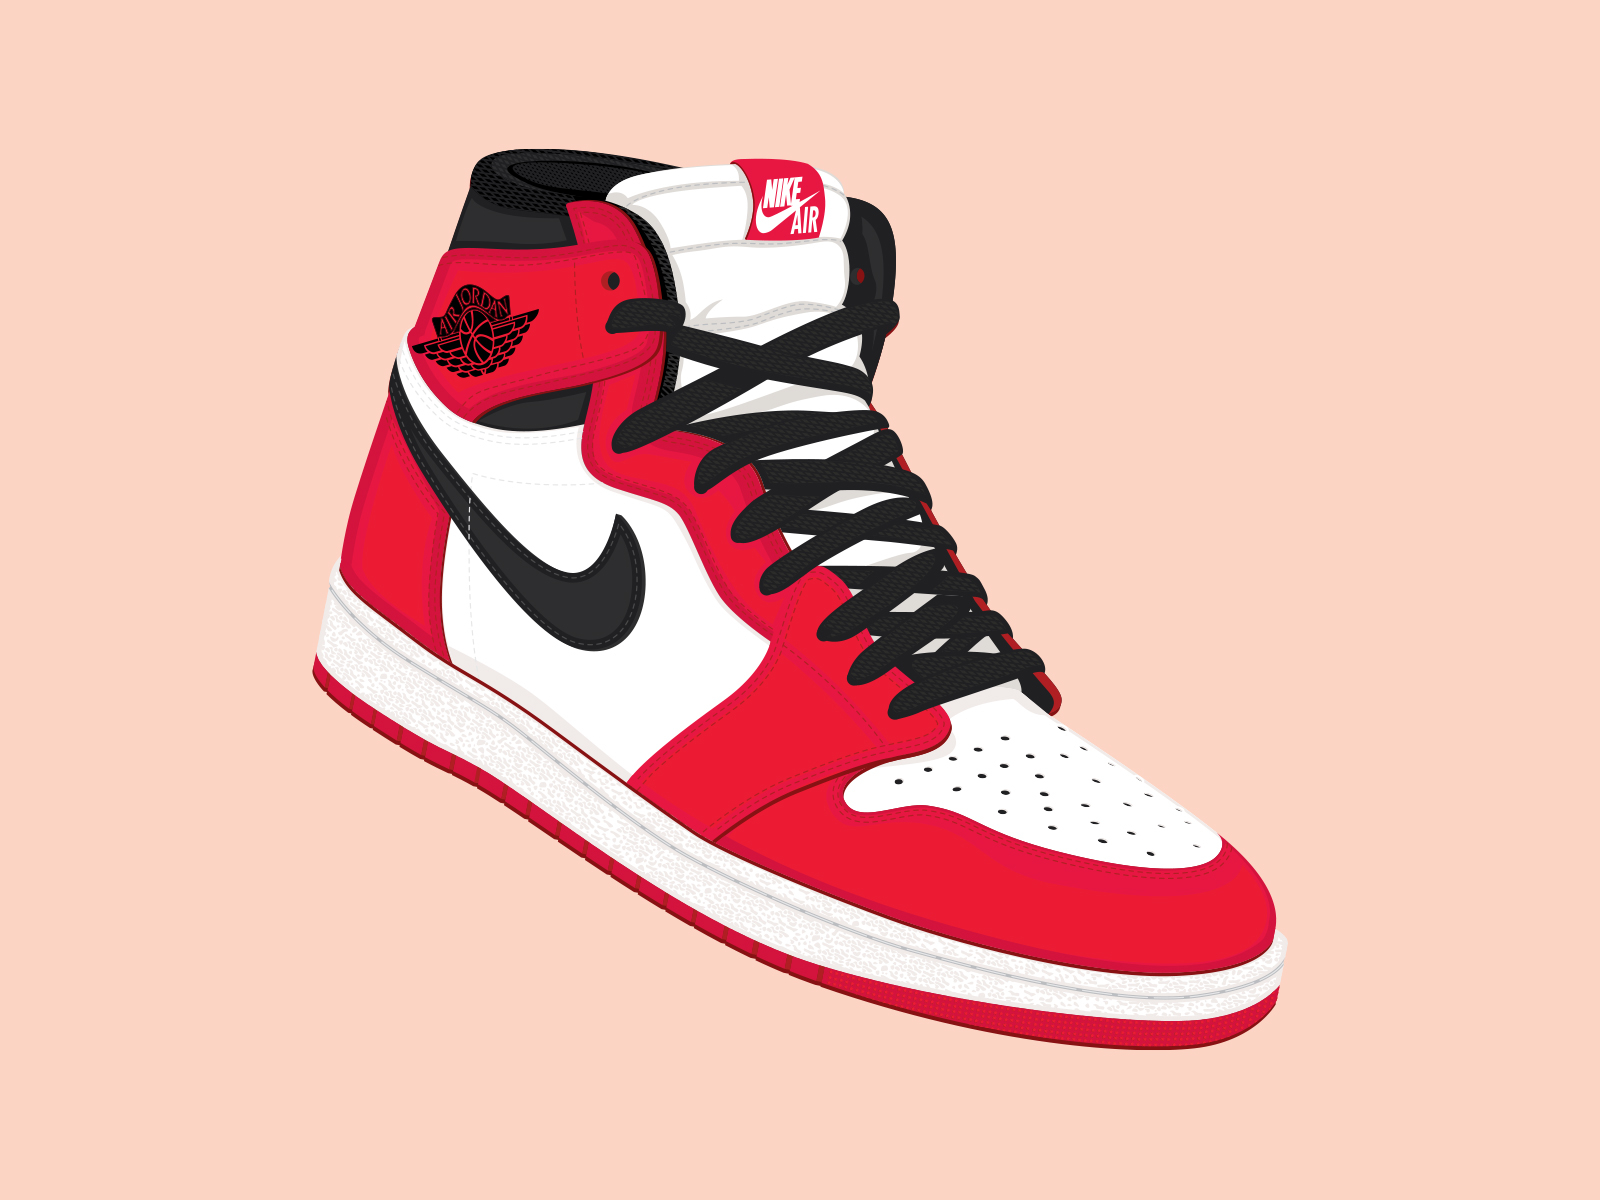 Like Mike by Tyler Pate on Dribbble